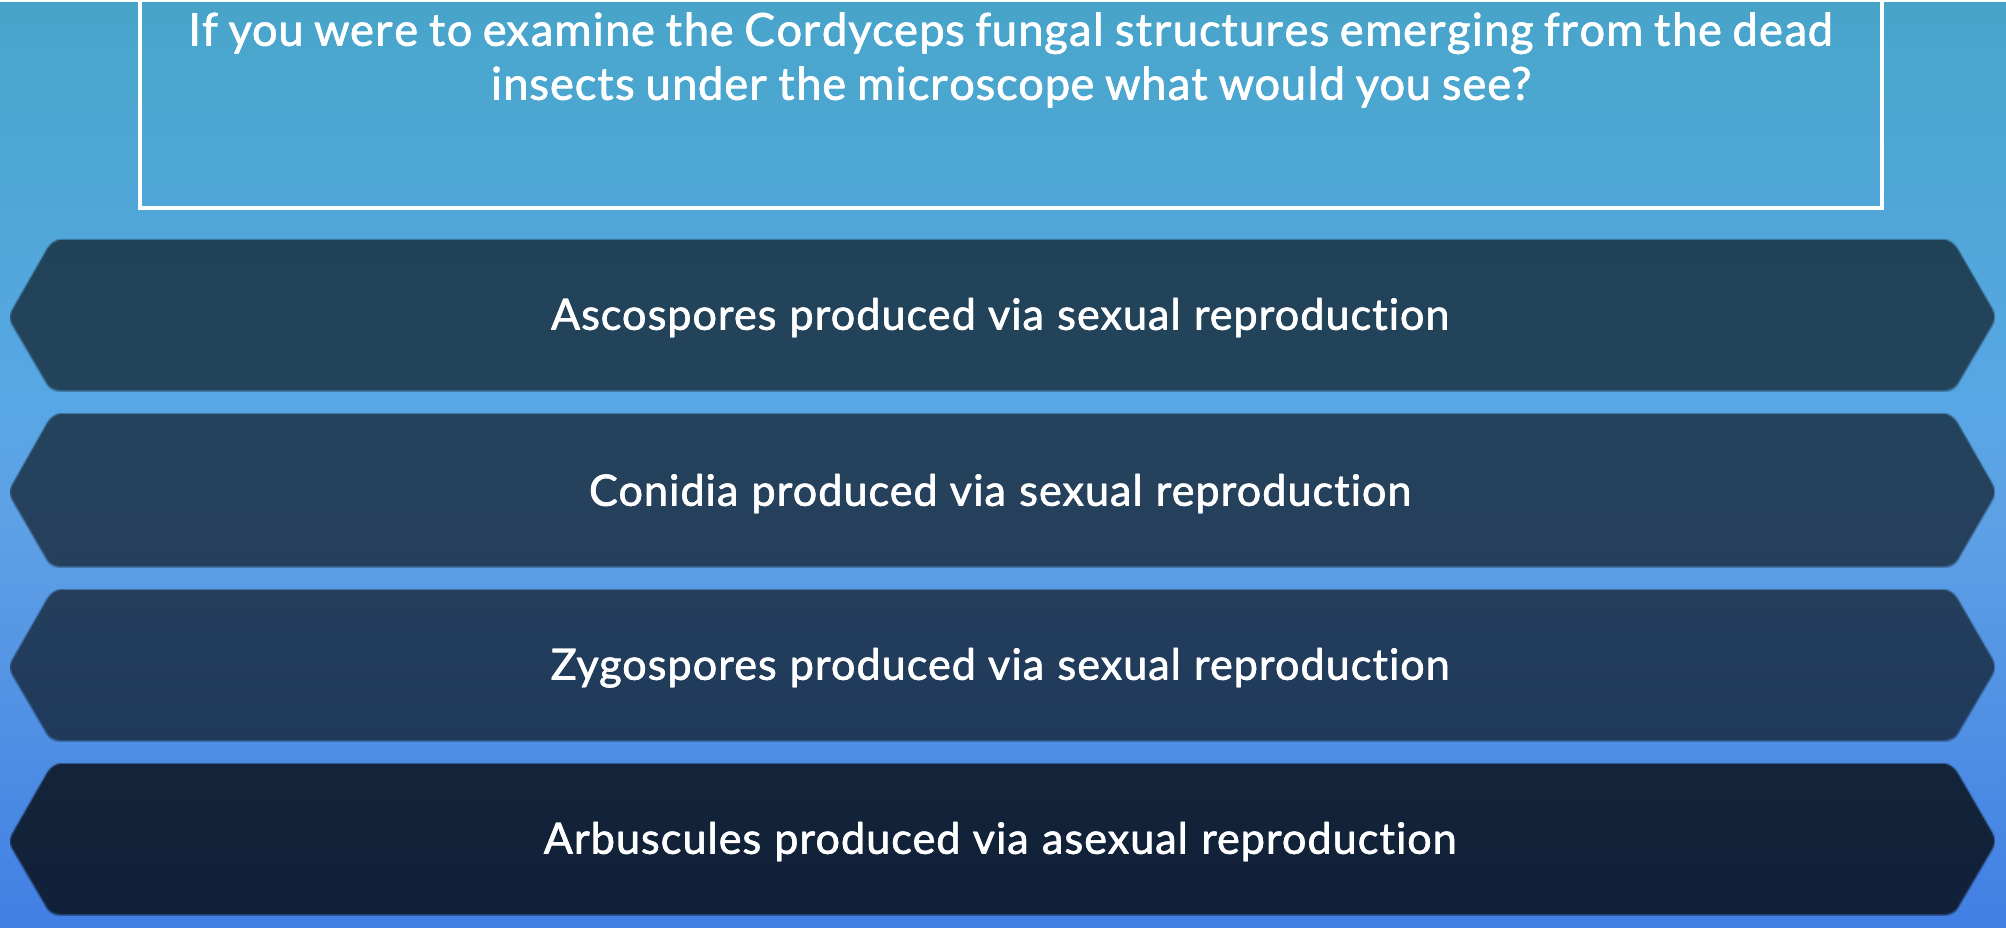 If you were to examine the Cordyceps fungal structures emerging from the dead
insects under the microscope what would you see?
Ascospores produced via sexual reproduction
Conidia produced via sexual reproduction
Zygospores produced via sexual reproduction
Arbuscules produced via asexual reproduction
